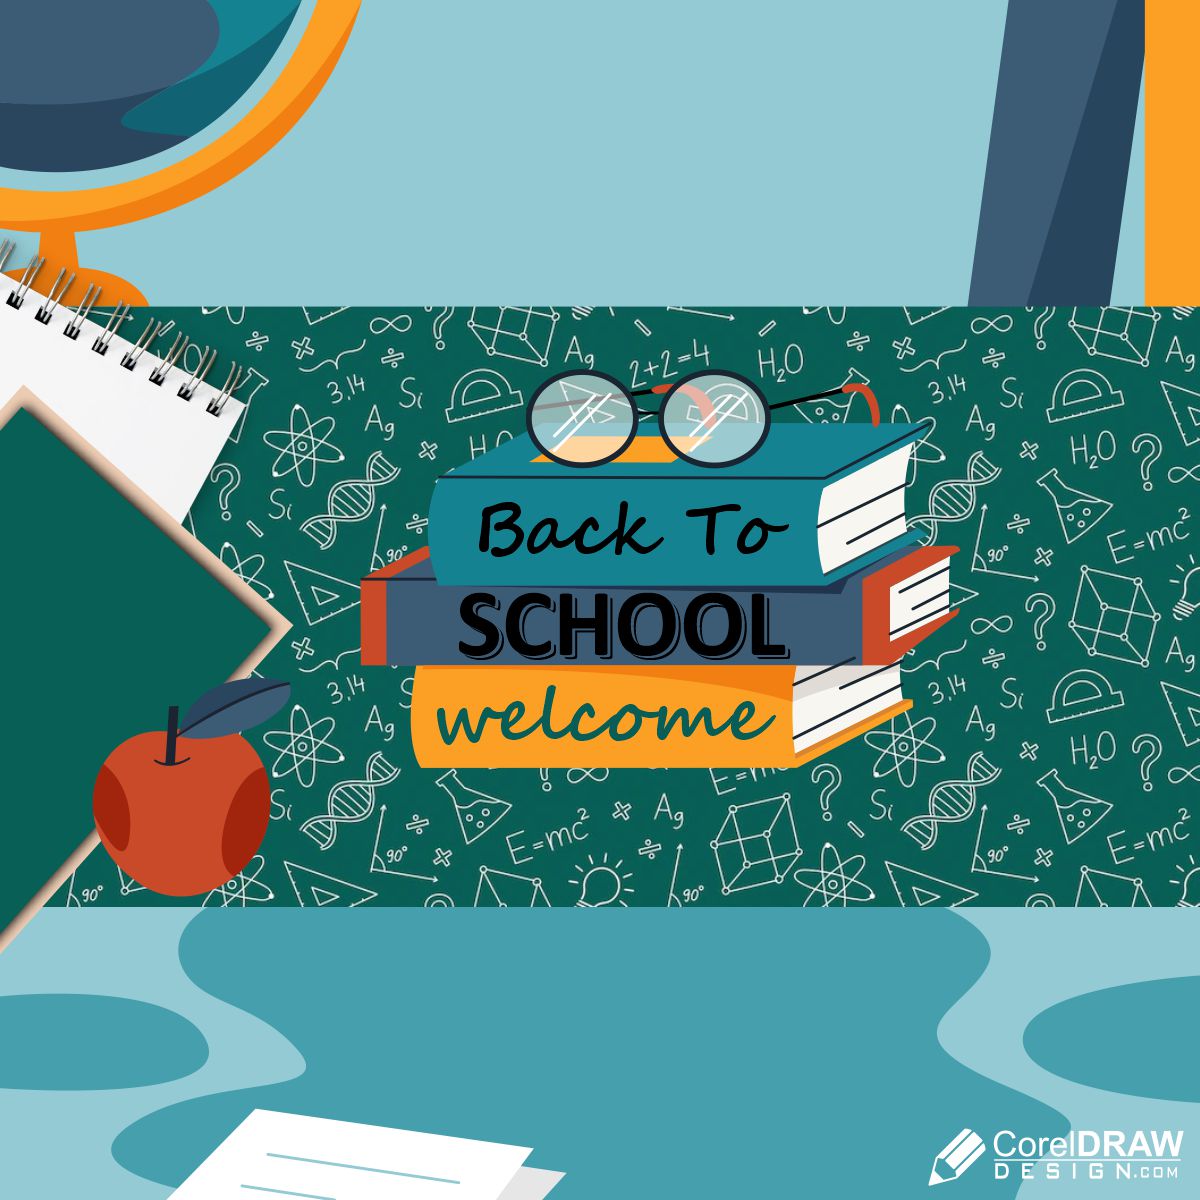 Welcome back sign Vectors & Illustrations for Free Download